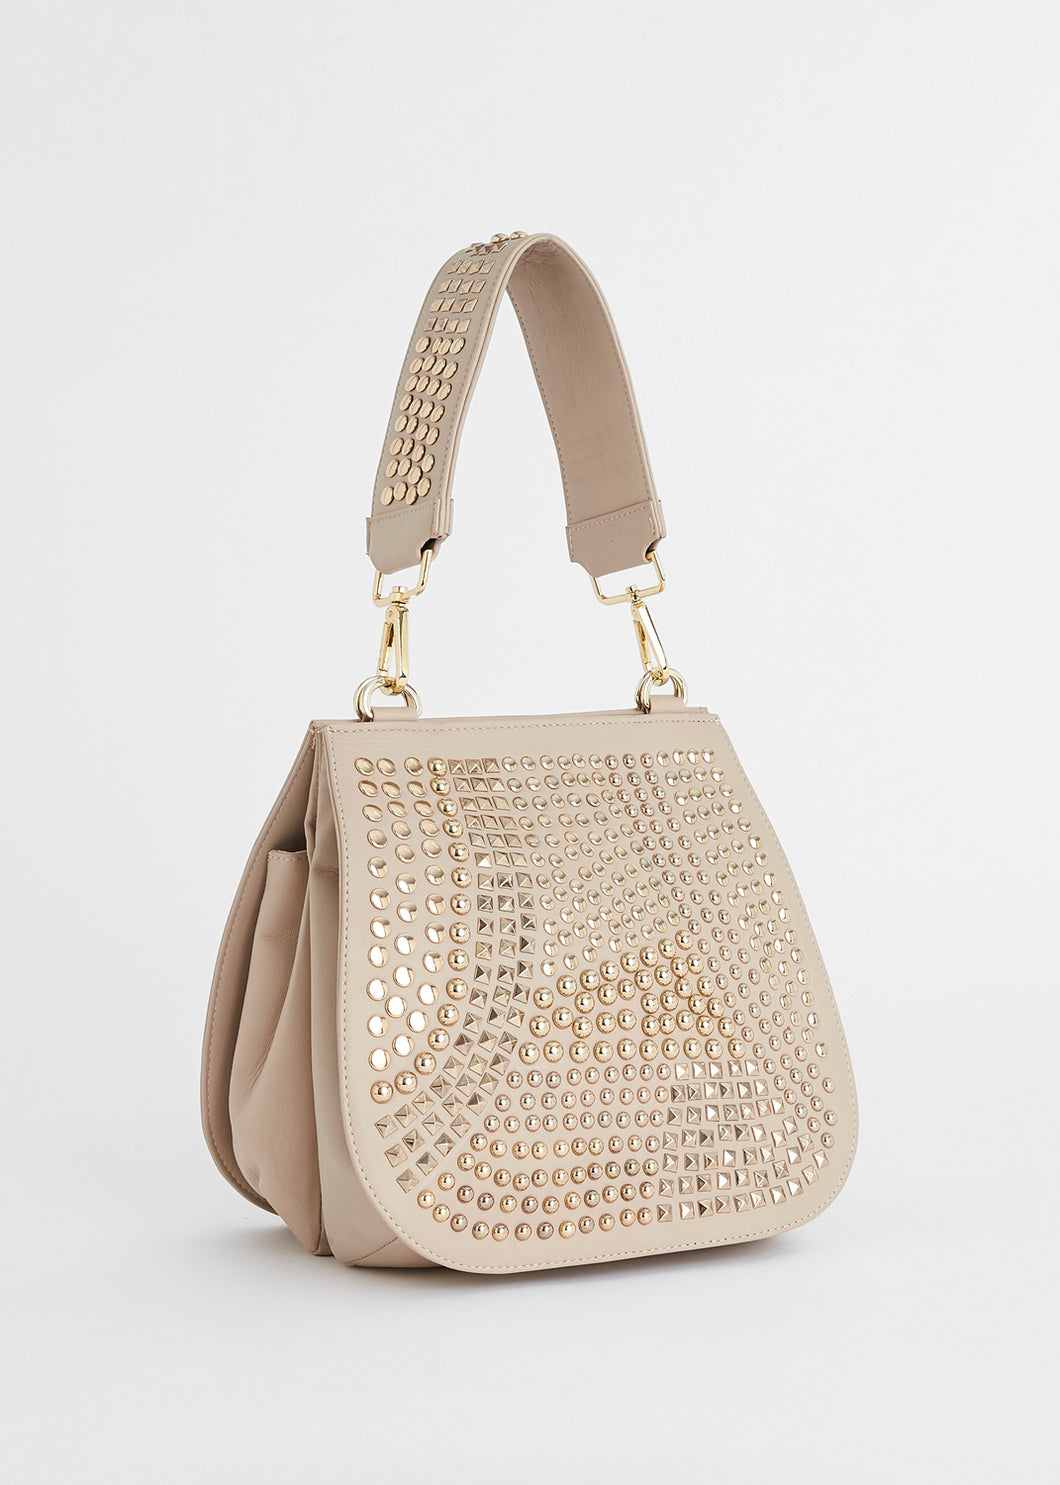 Double_Sided_Saddle_Bag_in_Cream_Gold_Stud